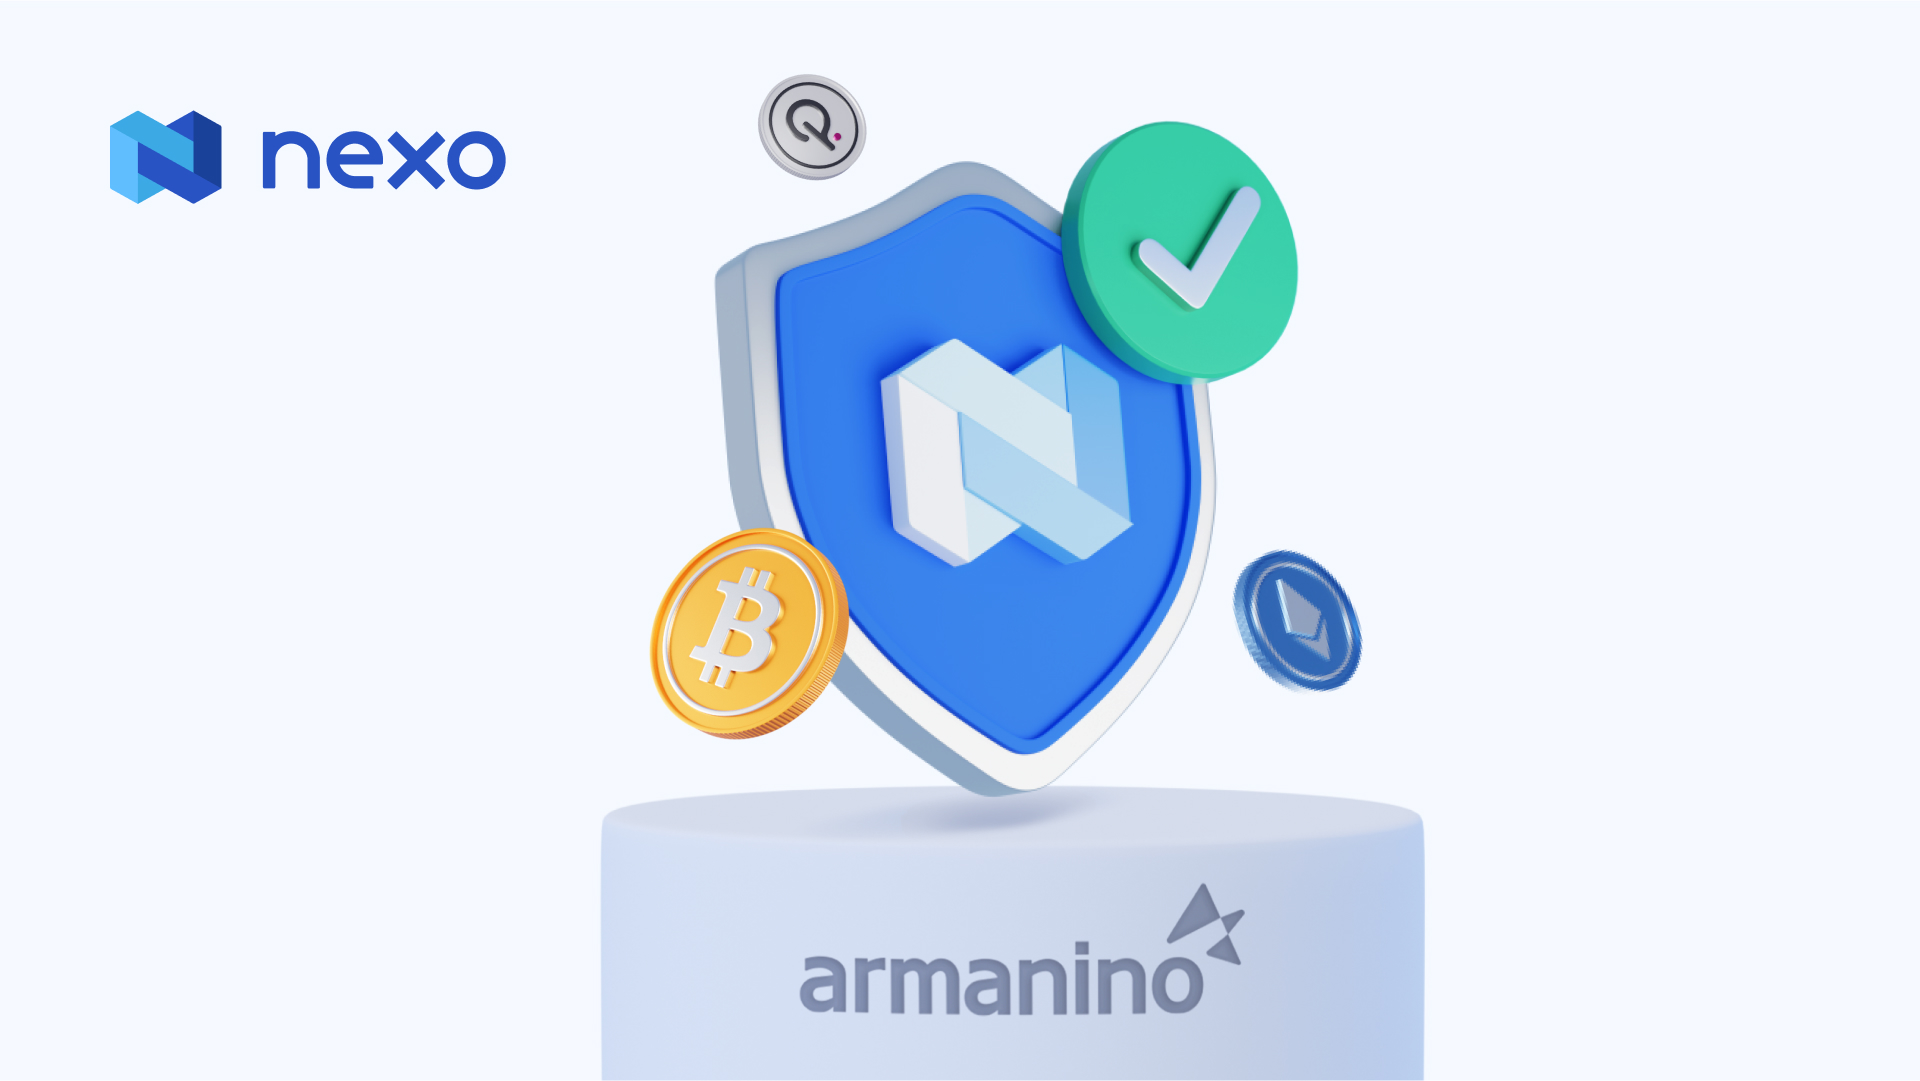 Nexo Passes Real-Time Armanino Audit, Becomes the First Crypto Lender to Shed Light on Reserves